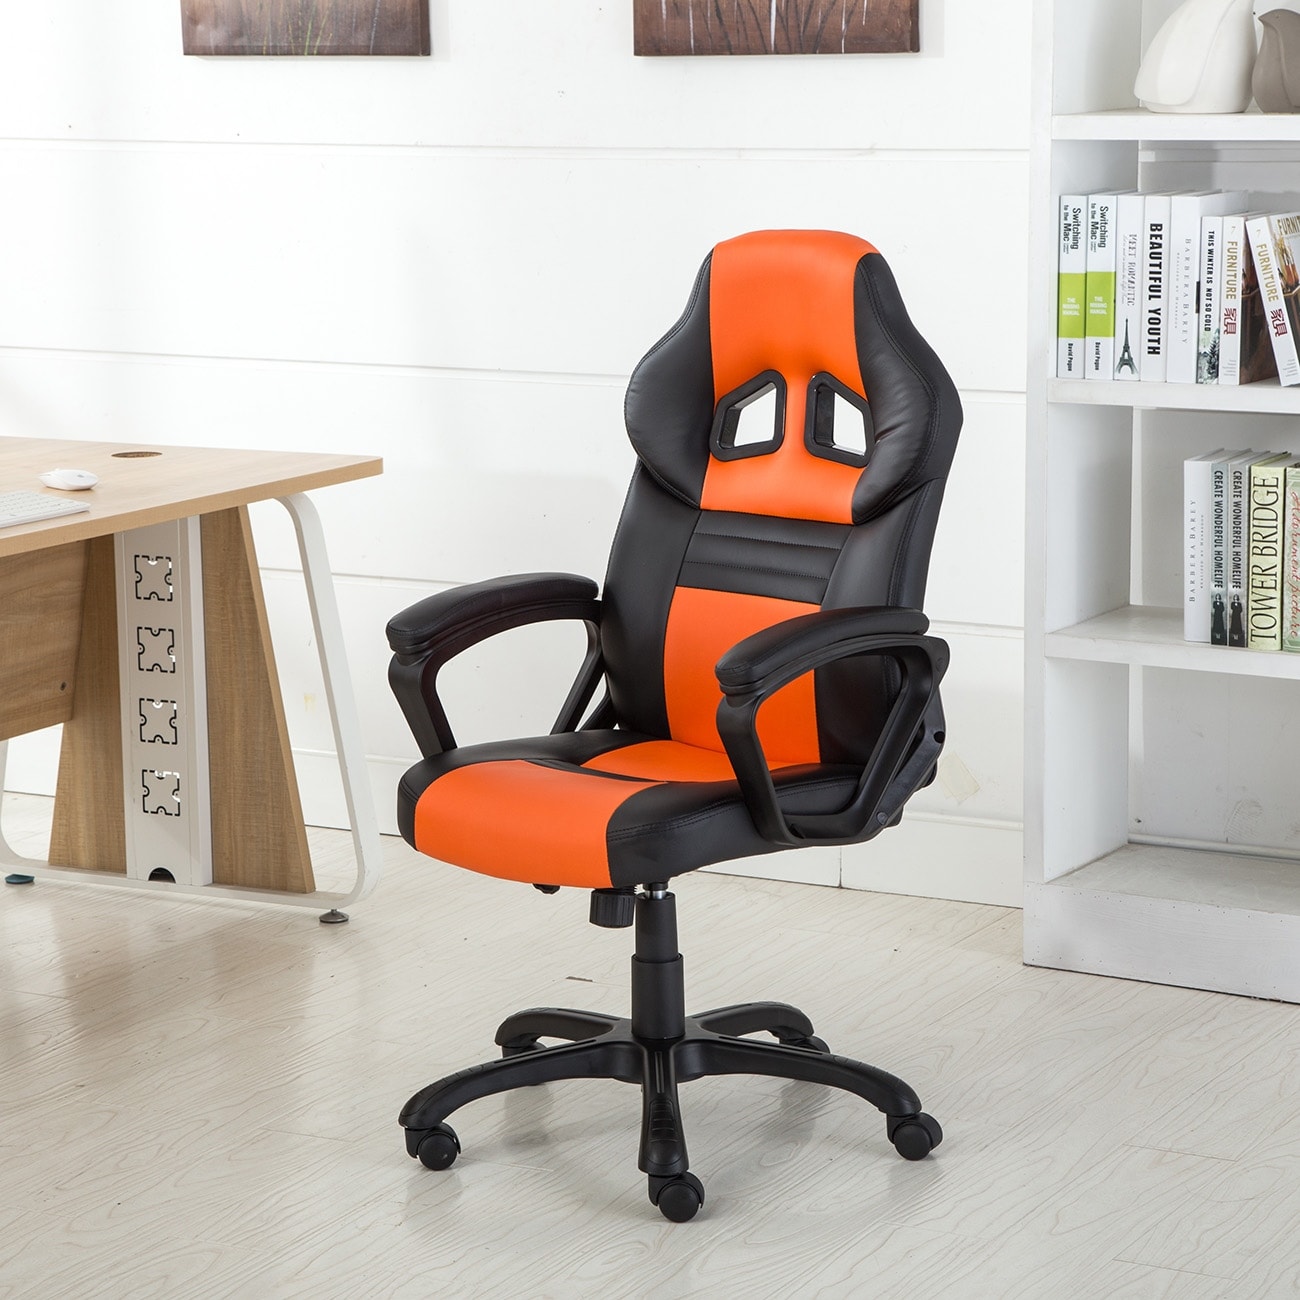 Executive Swivel Racing Office Chair High Back Computer Desk Seat PU Leather 